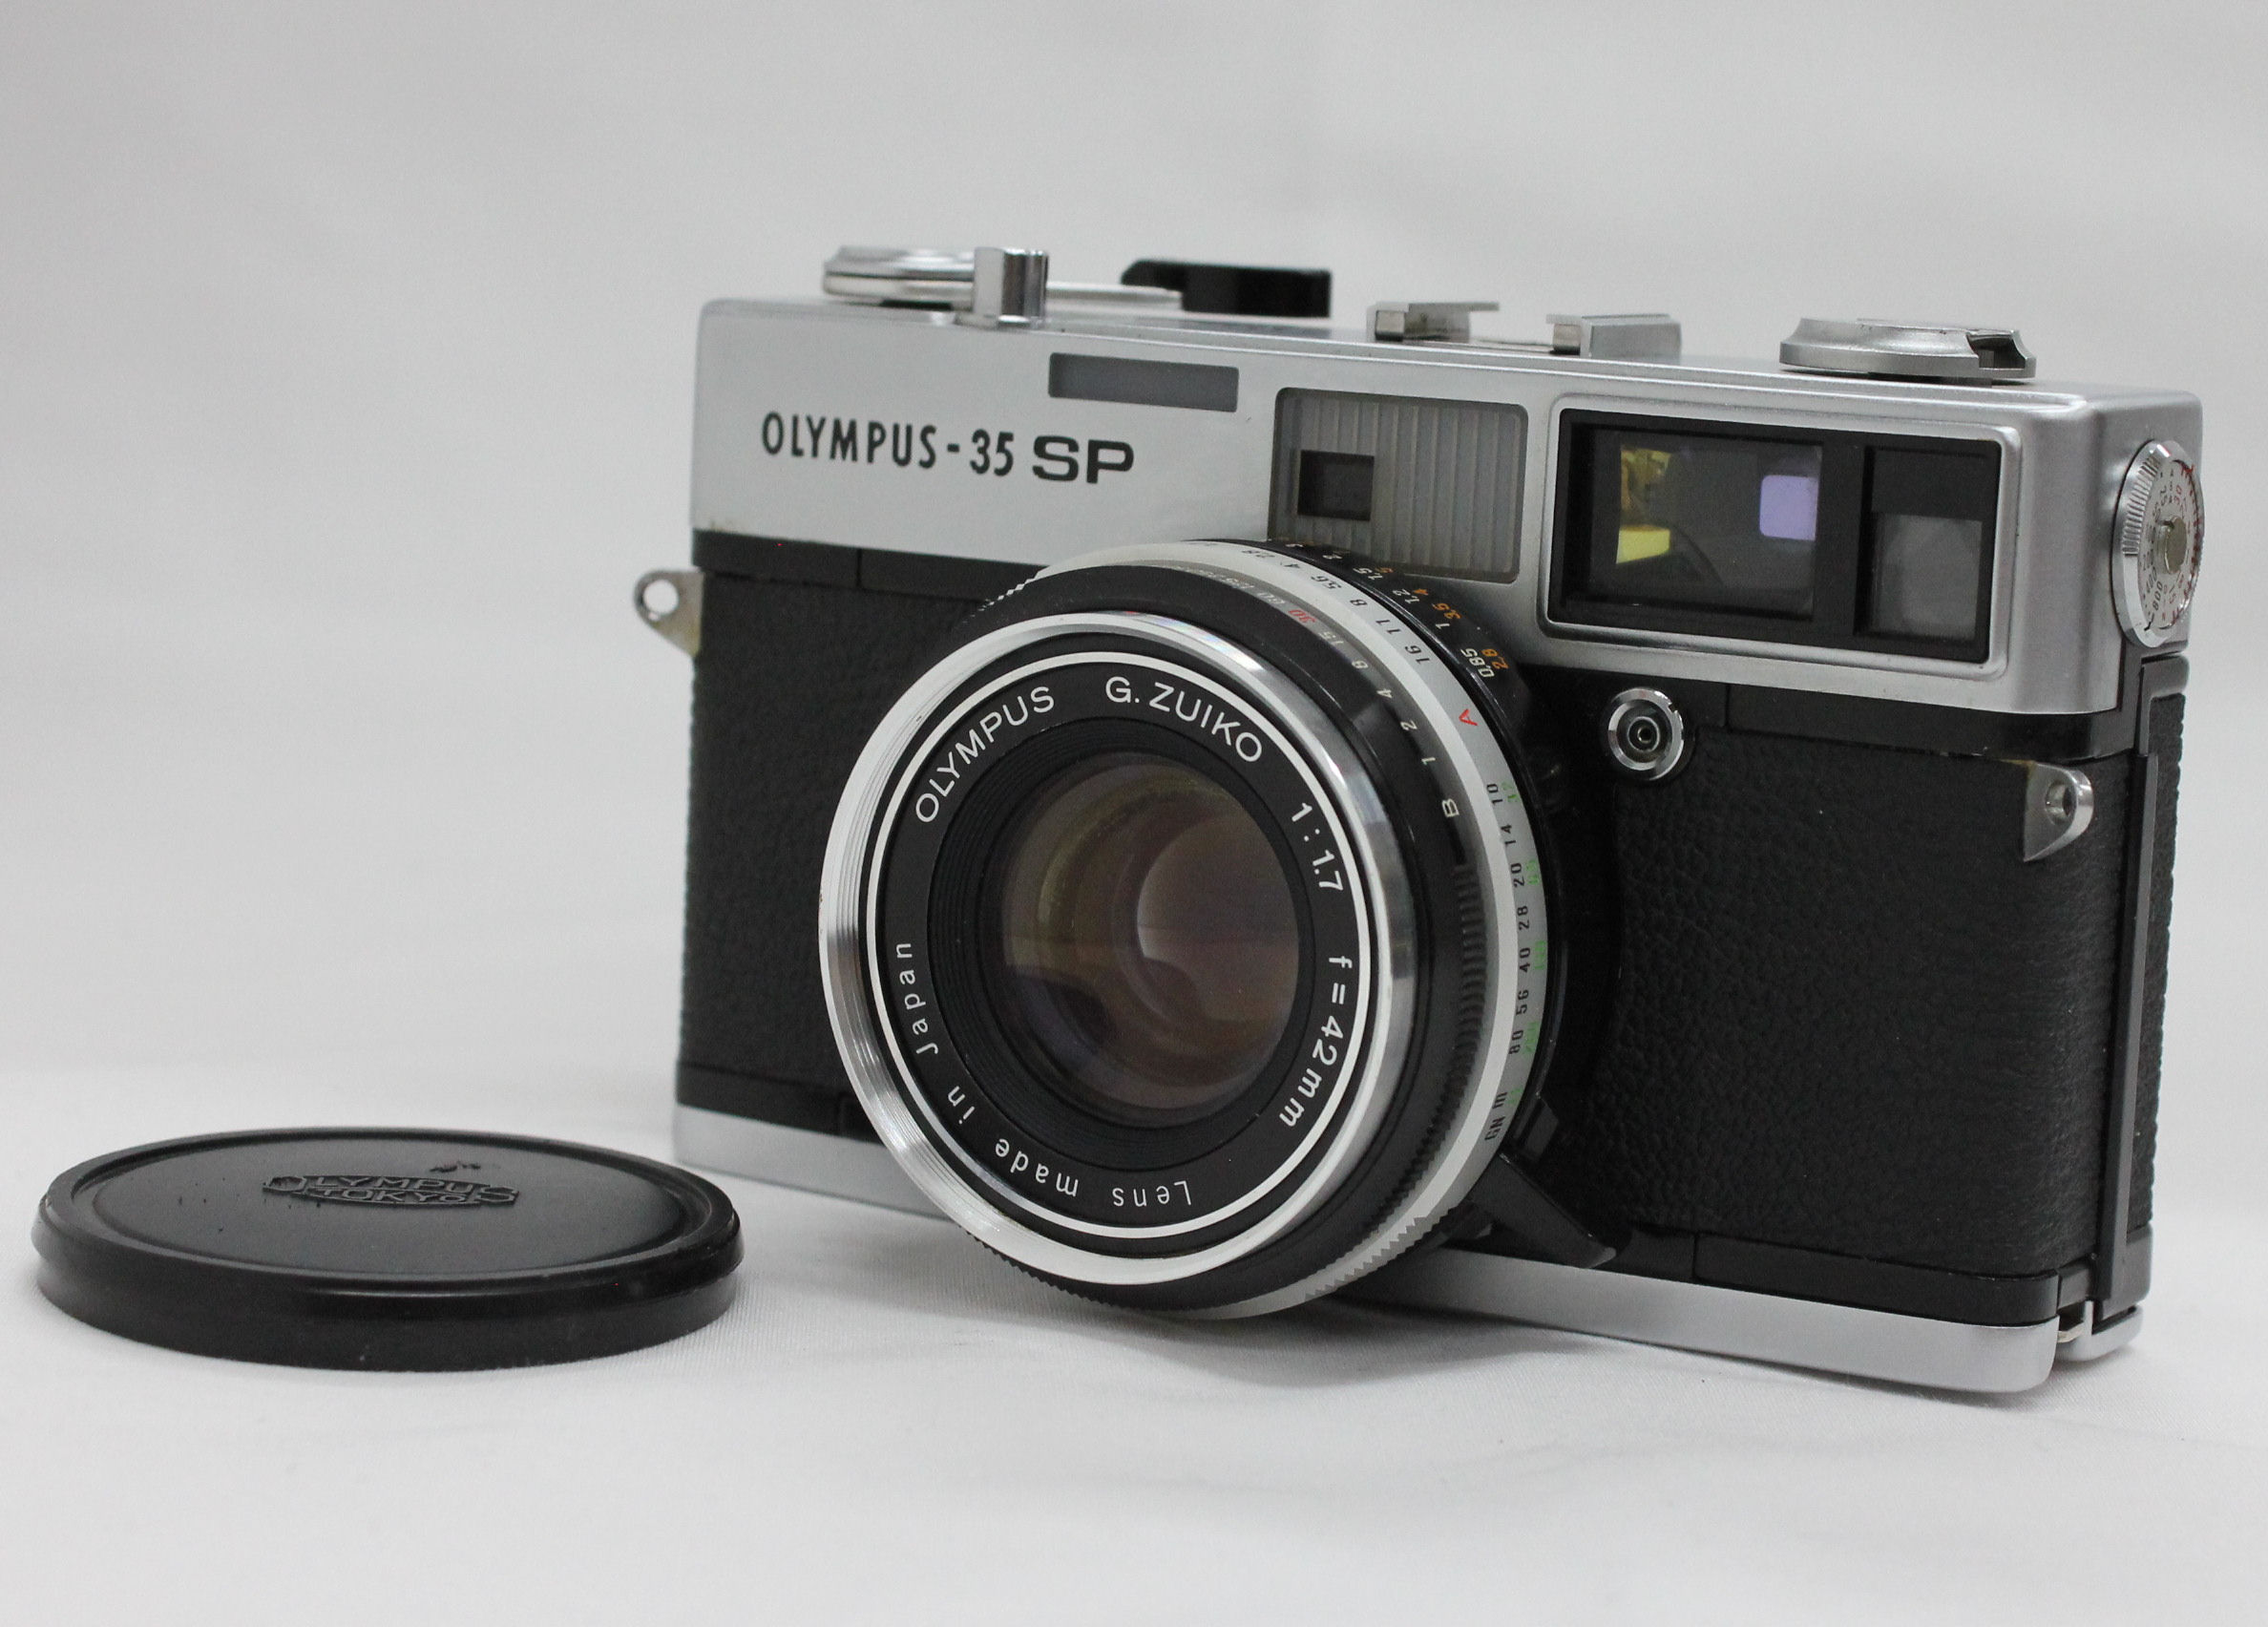 [Excellent+++] Olympus 35 SP 35mm Rangefinder Film Camera with G.Zuiko 42mm F1.7 Lens from Japan